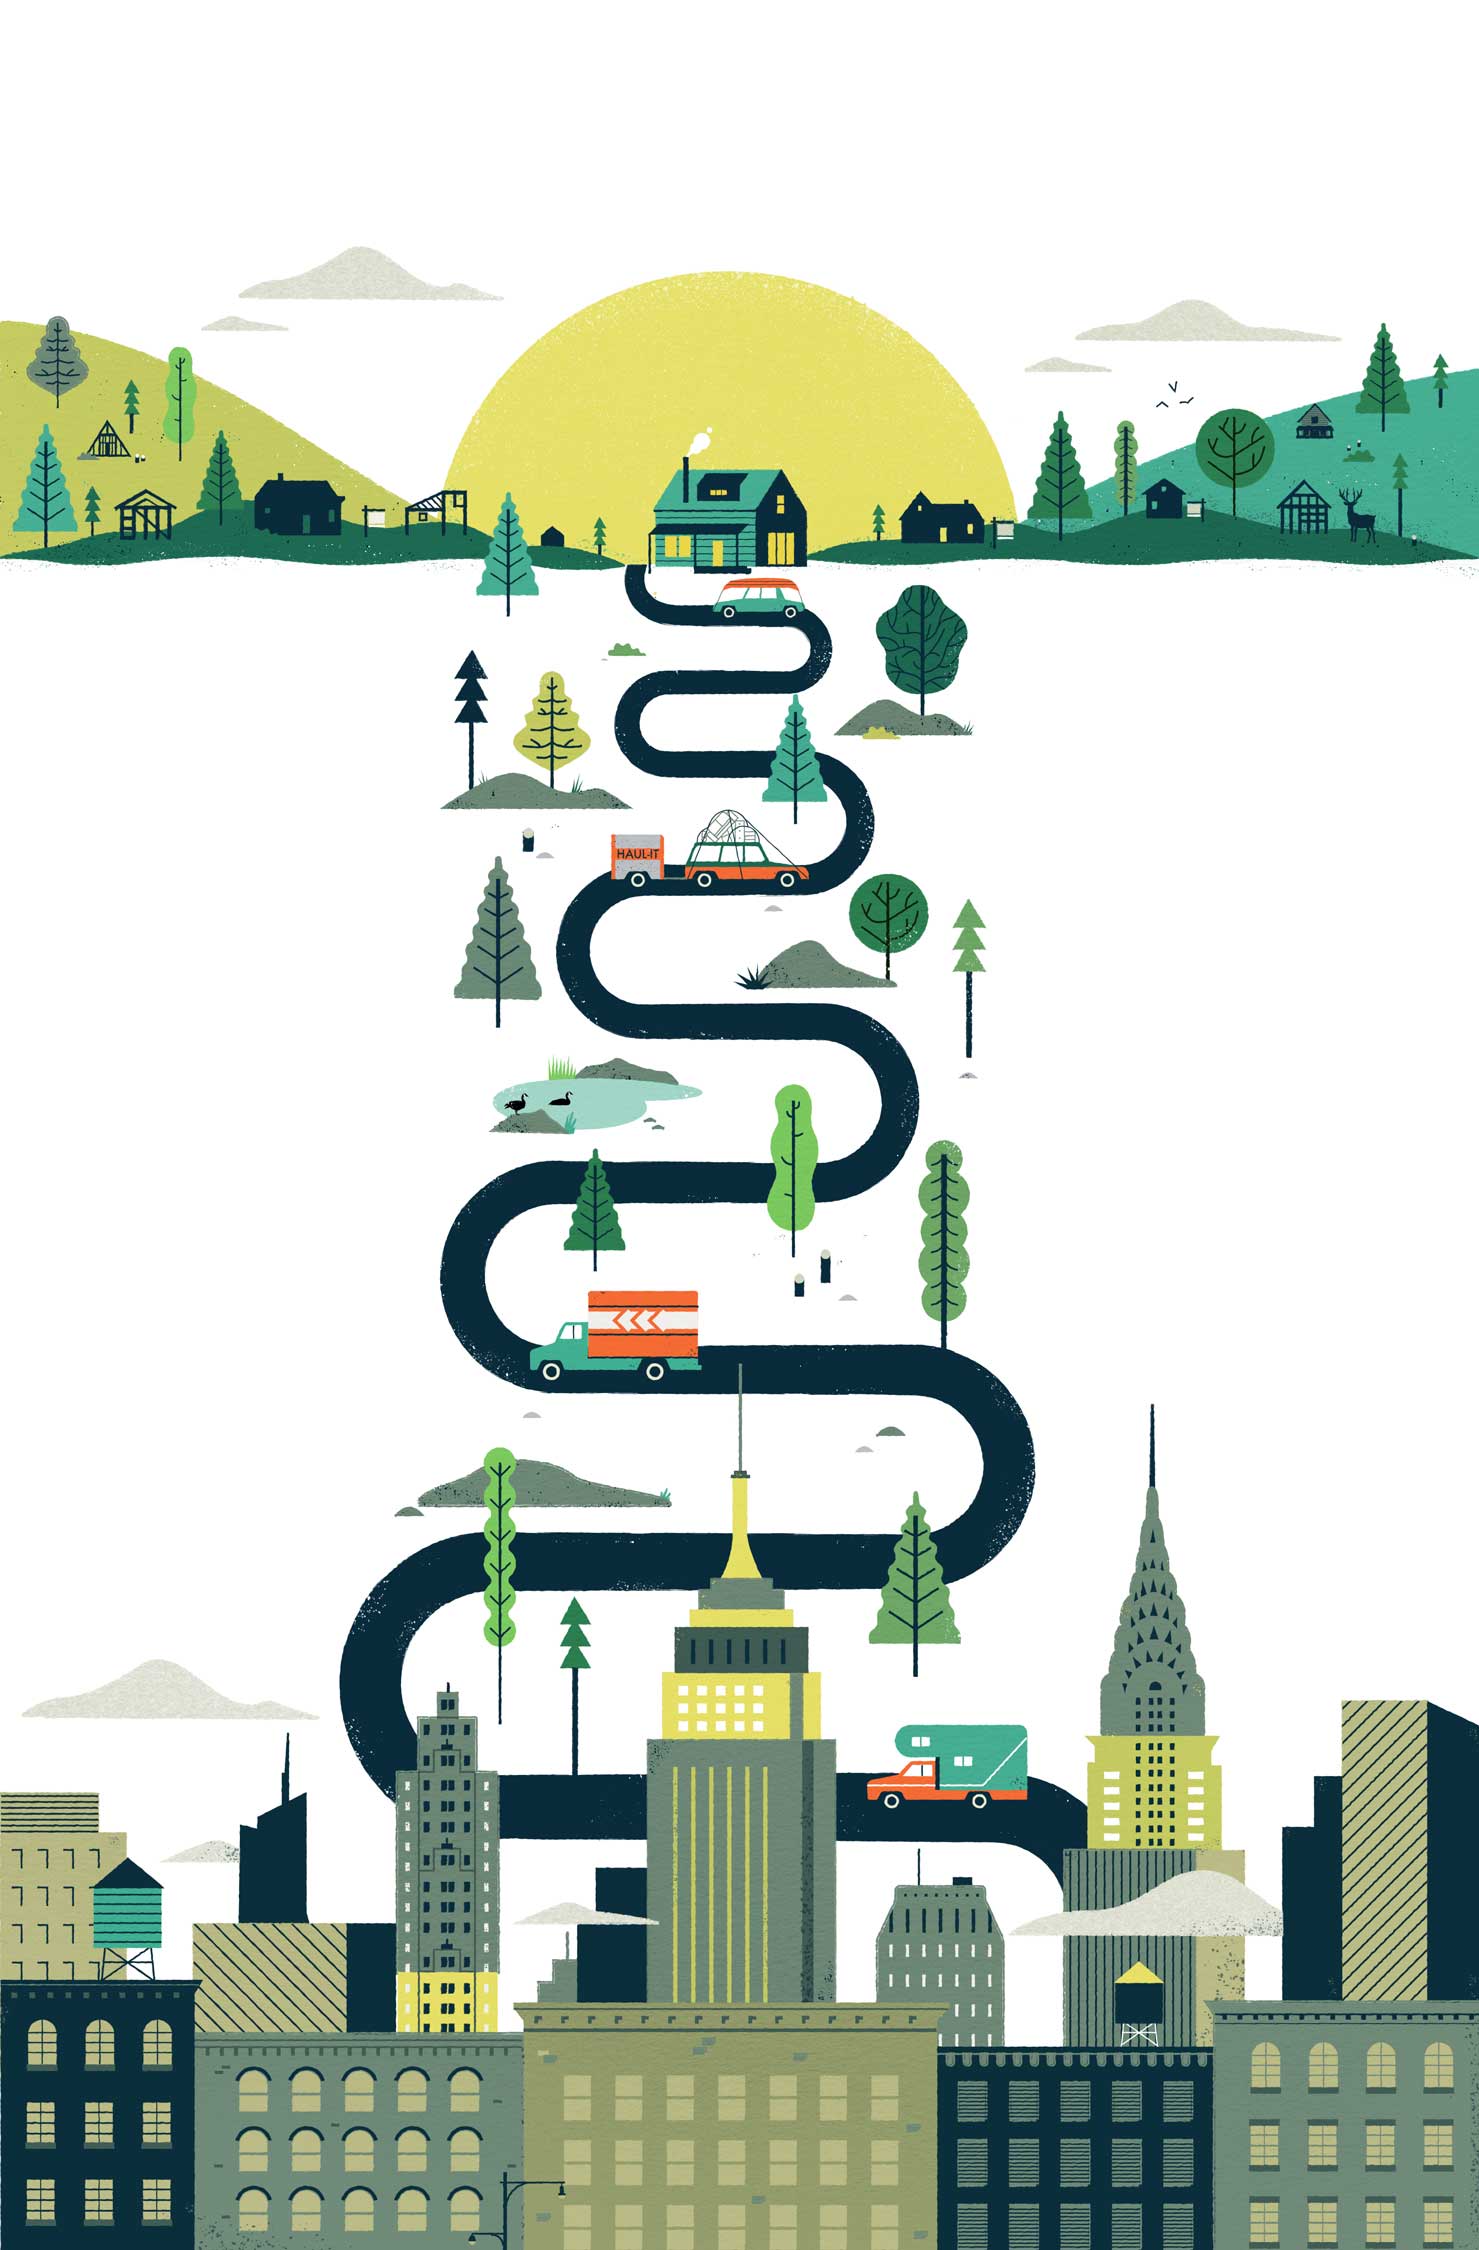 Mike Ellis Real Estate cover illustration for The New York Times